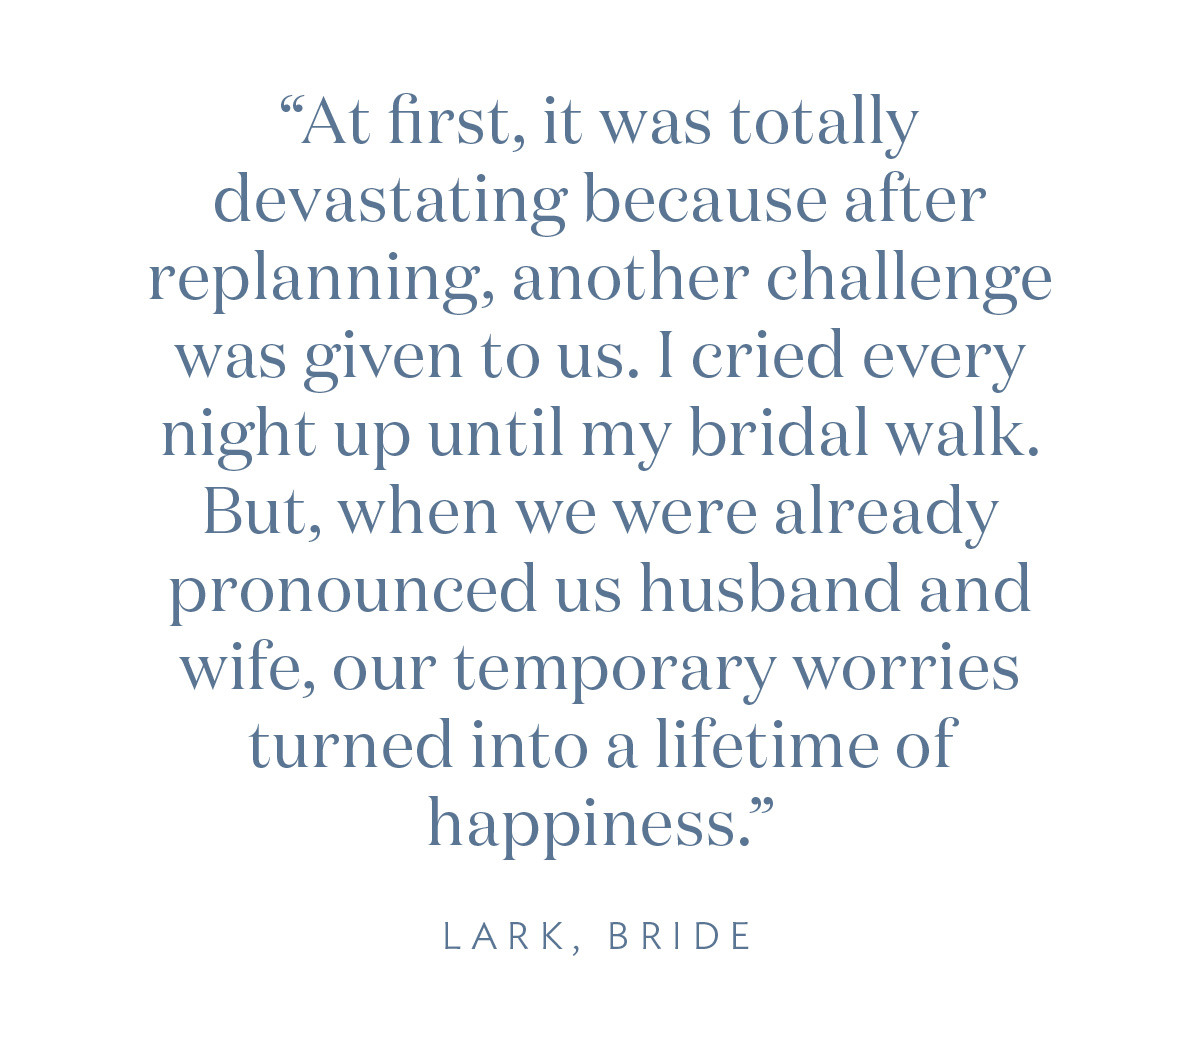 “At first, it was totally devastating because after replanning, another challenge was given to us. I cried every night up until my bridal walk. But when we were already pronounced as husband and wife, our temporary worries turned into a lifetime of happiness.” Lark, Bride